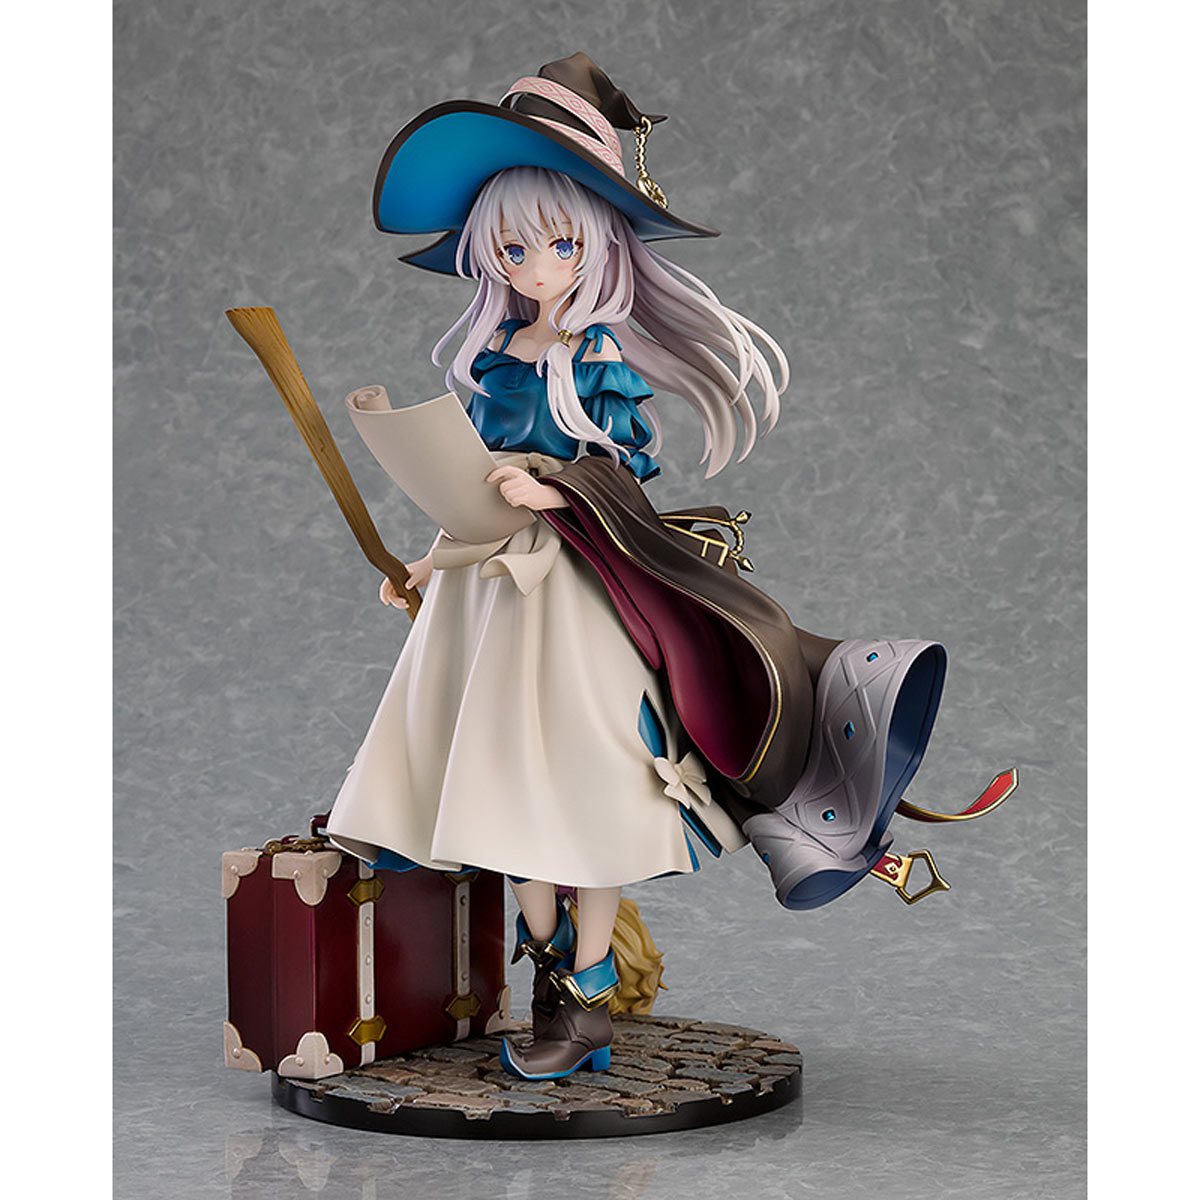 Wandering Witch: The Journey of Elaina - Elaina 1/7th Scale Figure (Early Summer Sky Ver.) Good Smile Company